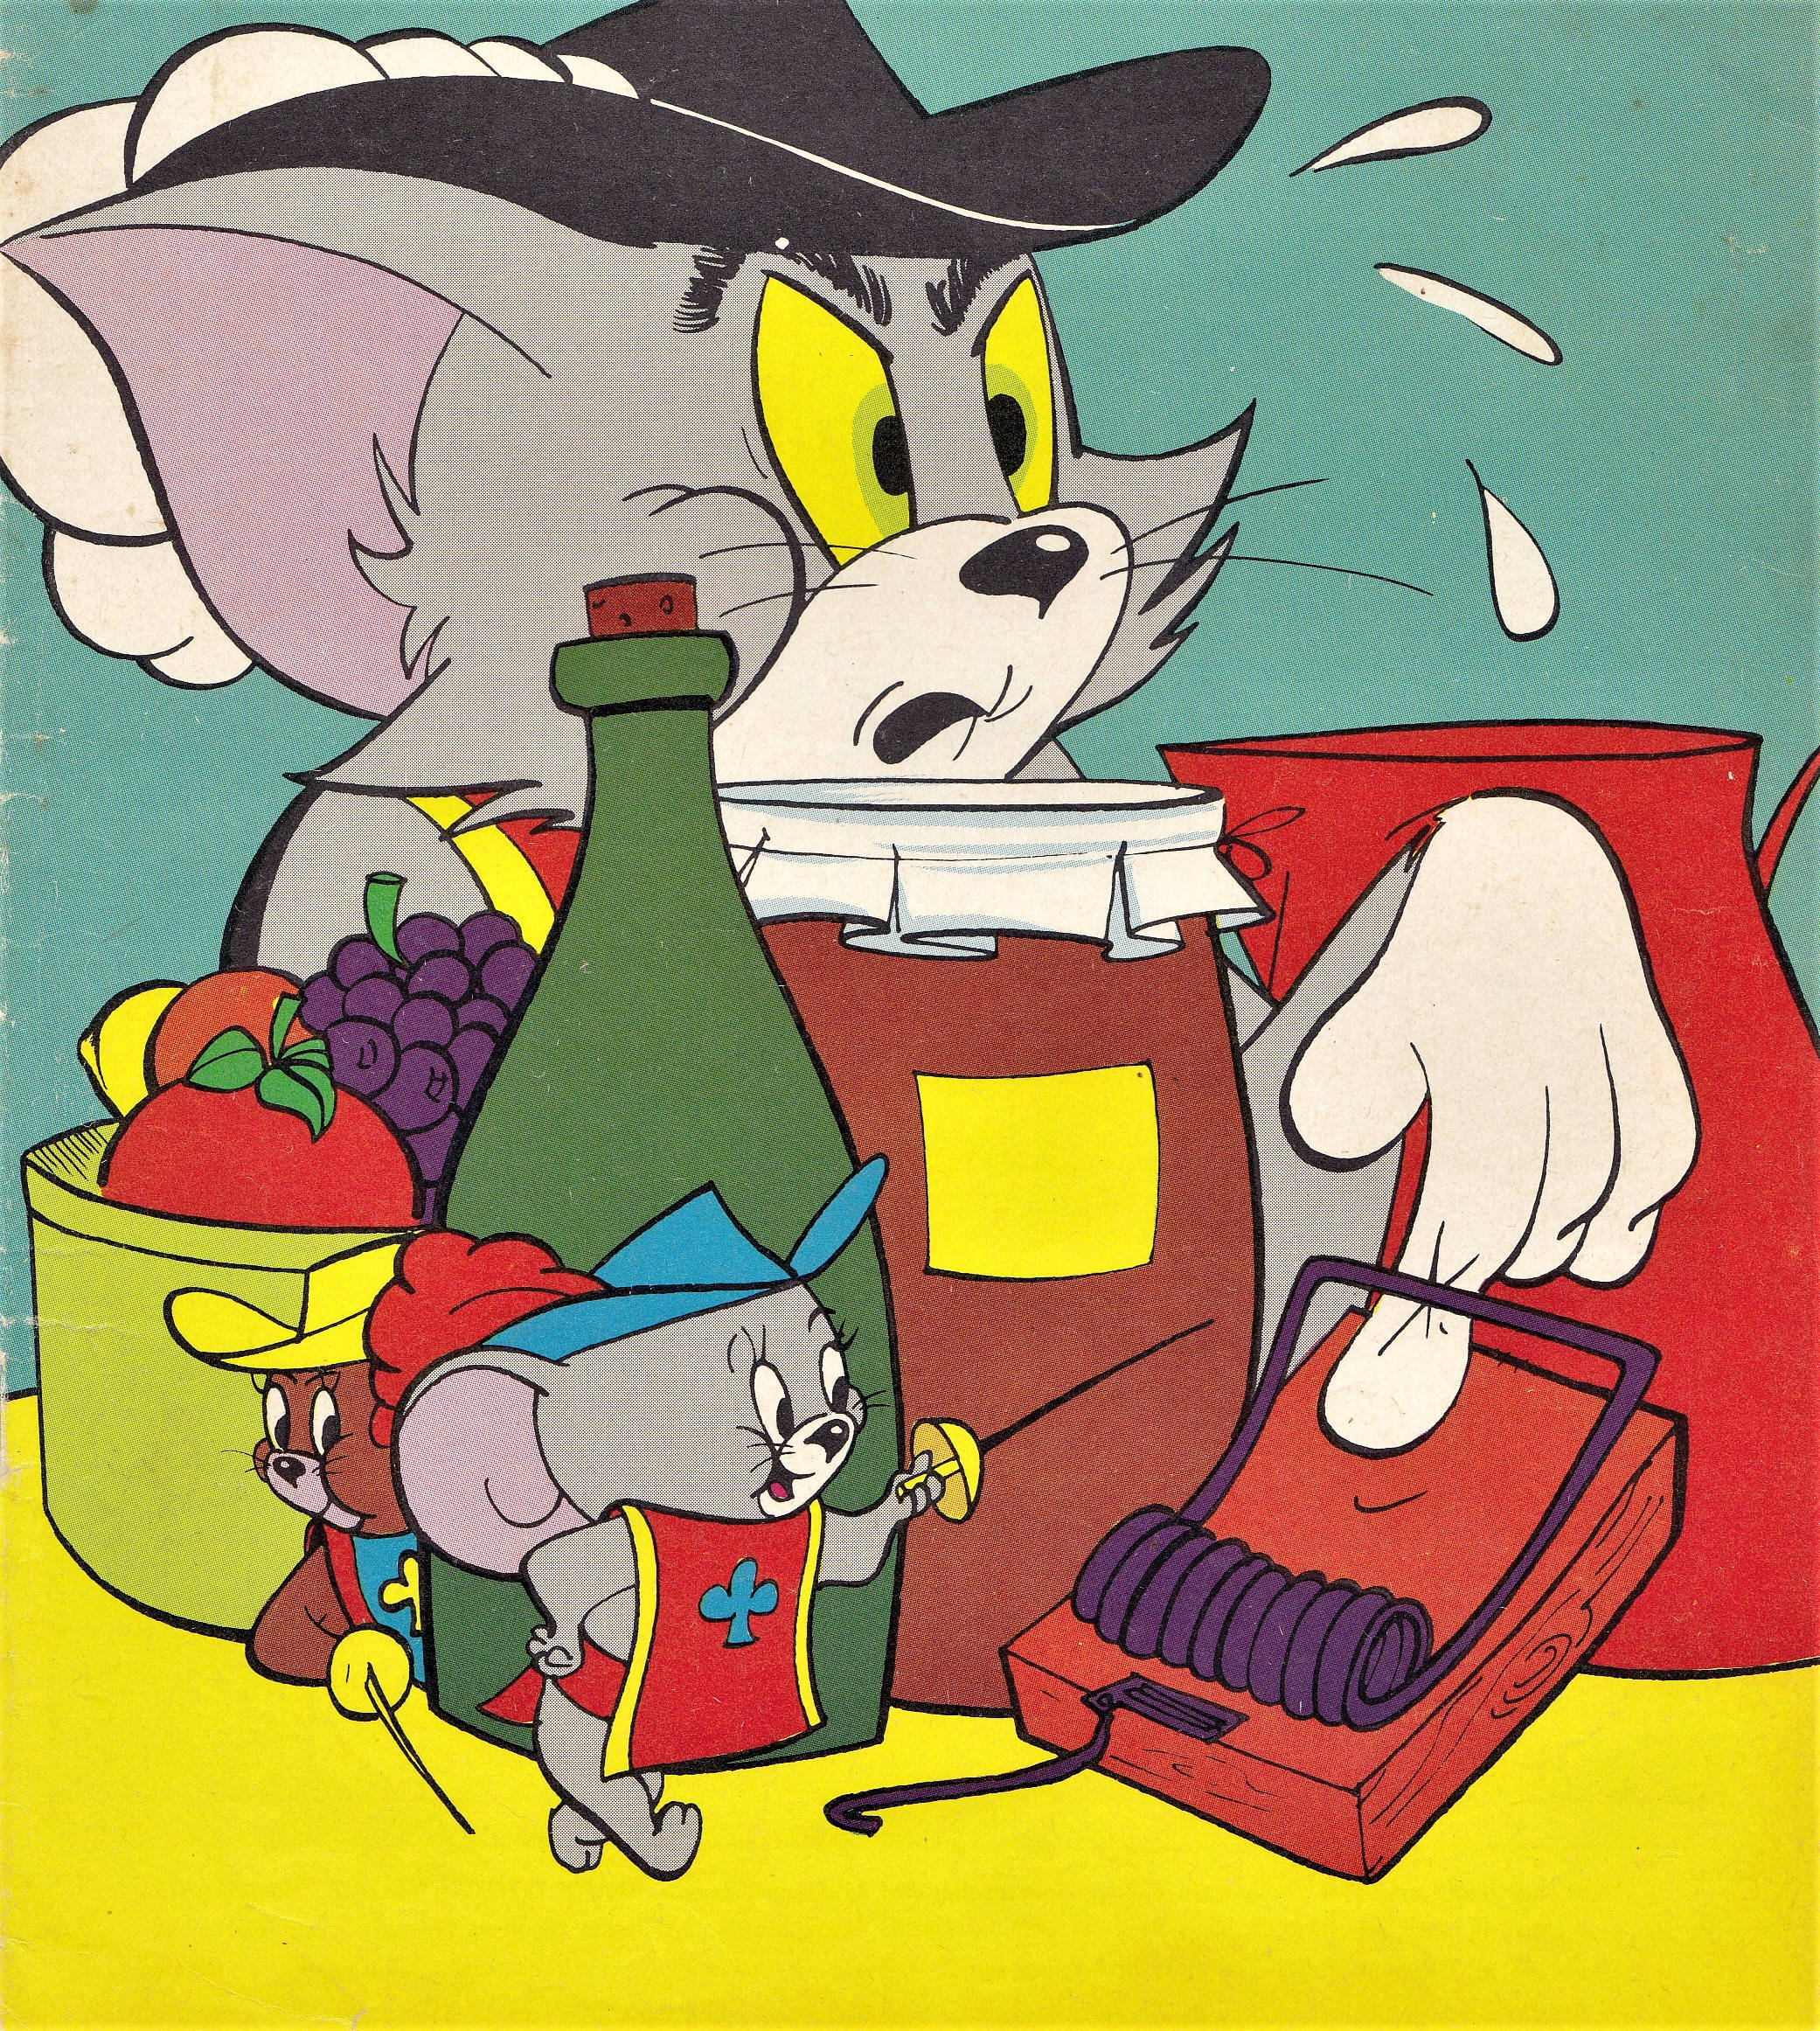 Vintage Tom and Jerry illustration of Tom in a hat and apron holding a bottle of alcohol and a mouse - Tom and Jerry